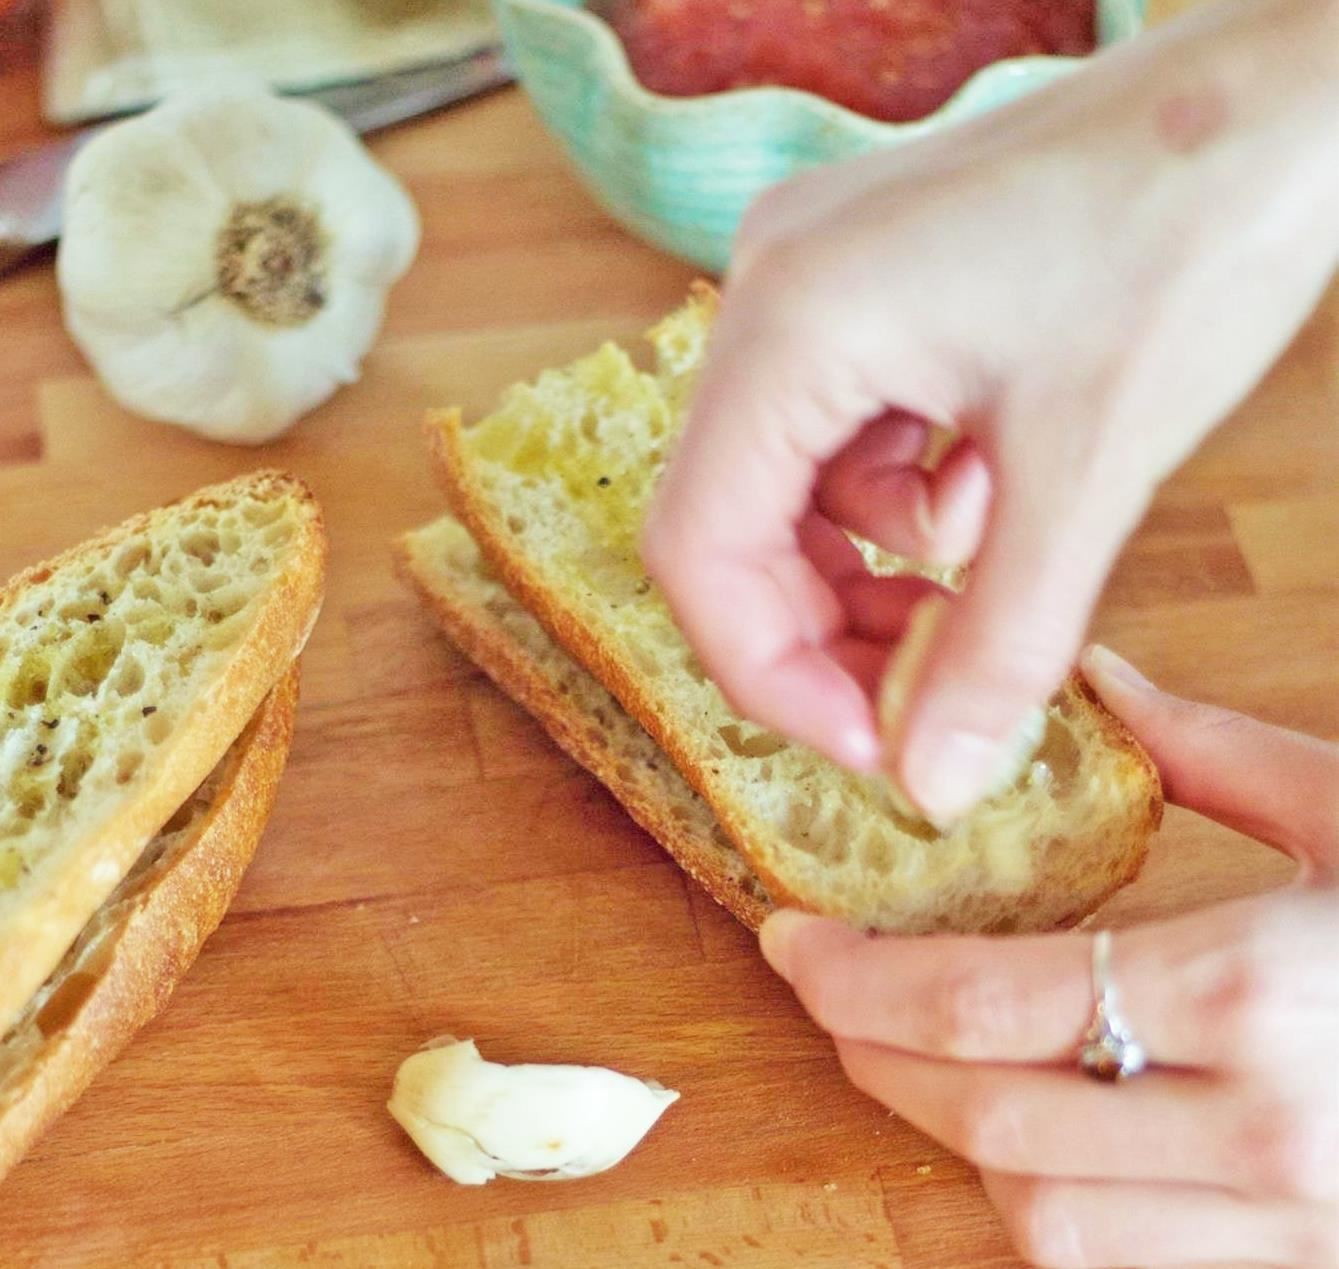 Grate Fresh Tomatoes Instead of Buying Canned (You Can Thank Us Later)